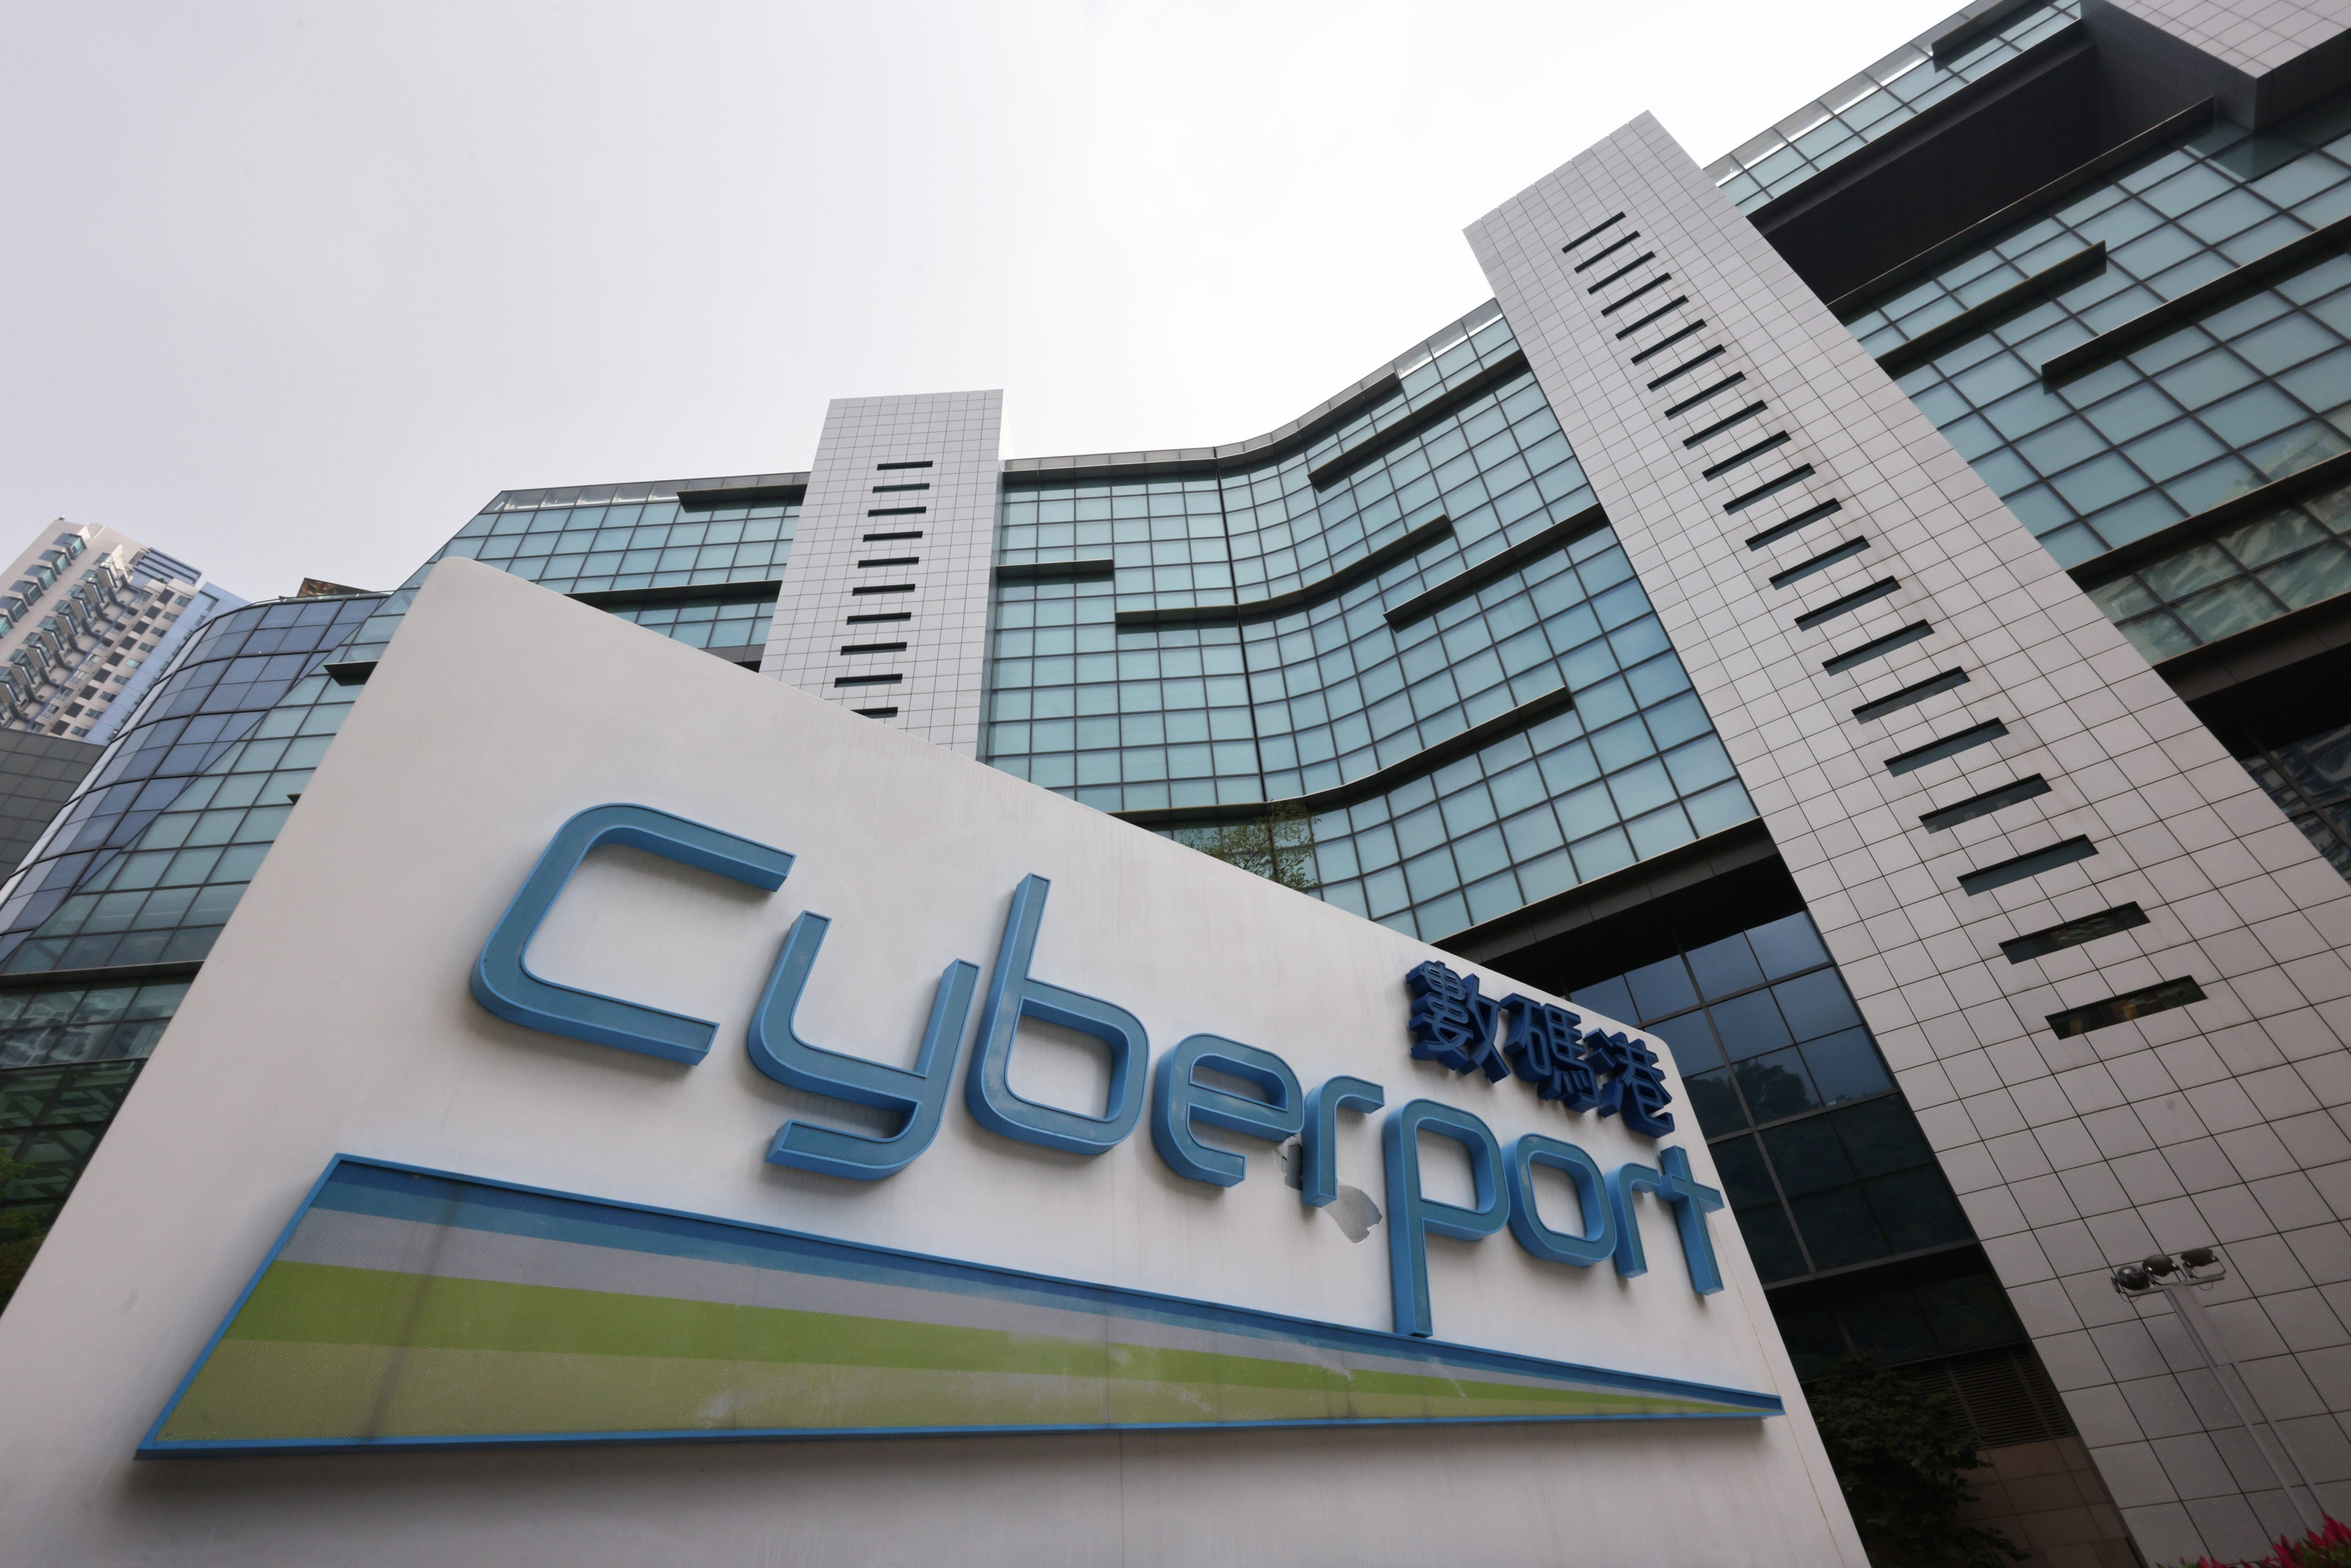 Cyberport contravened two principles of personal data protection laws by not keeping information secure and keeping it longer than the intended retention period, the privacy commissioner said. Photo: Jelly Tse
